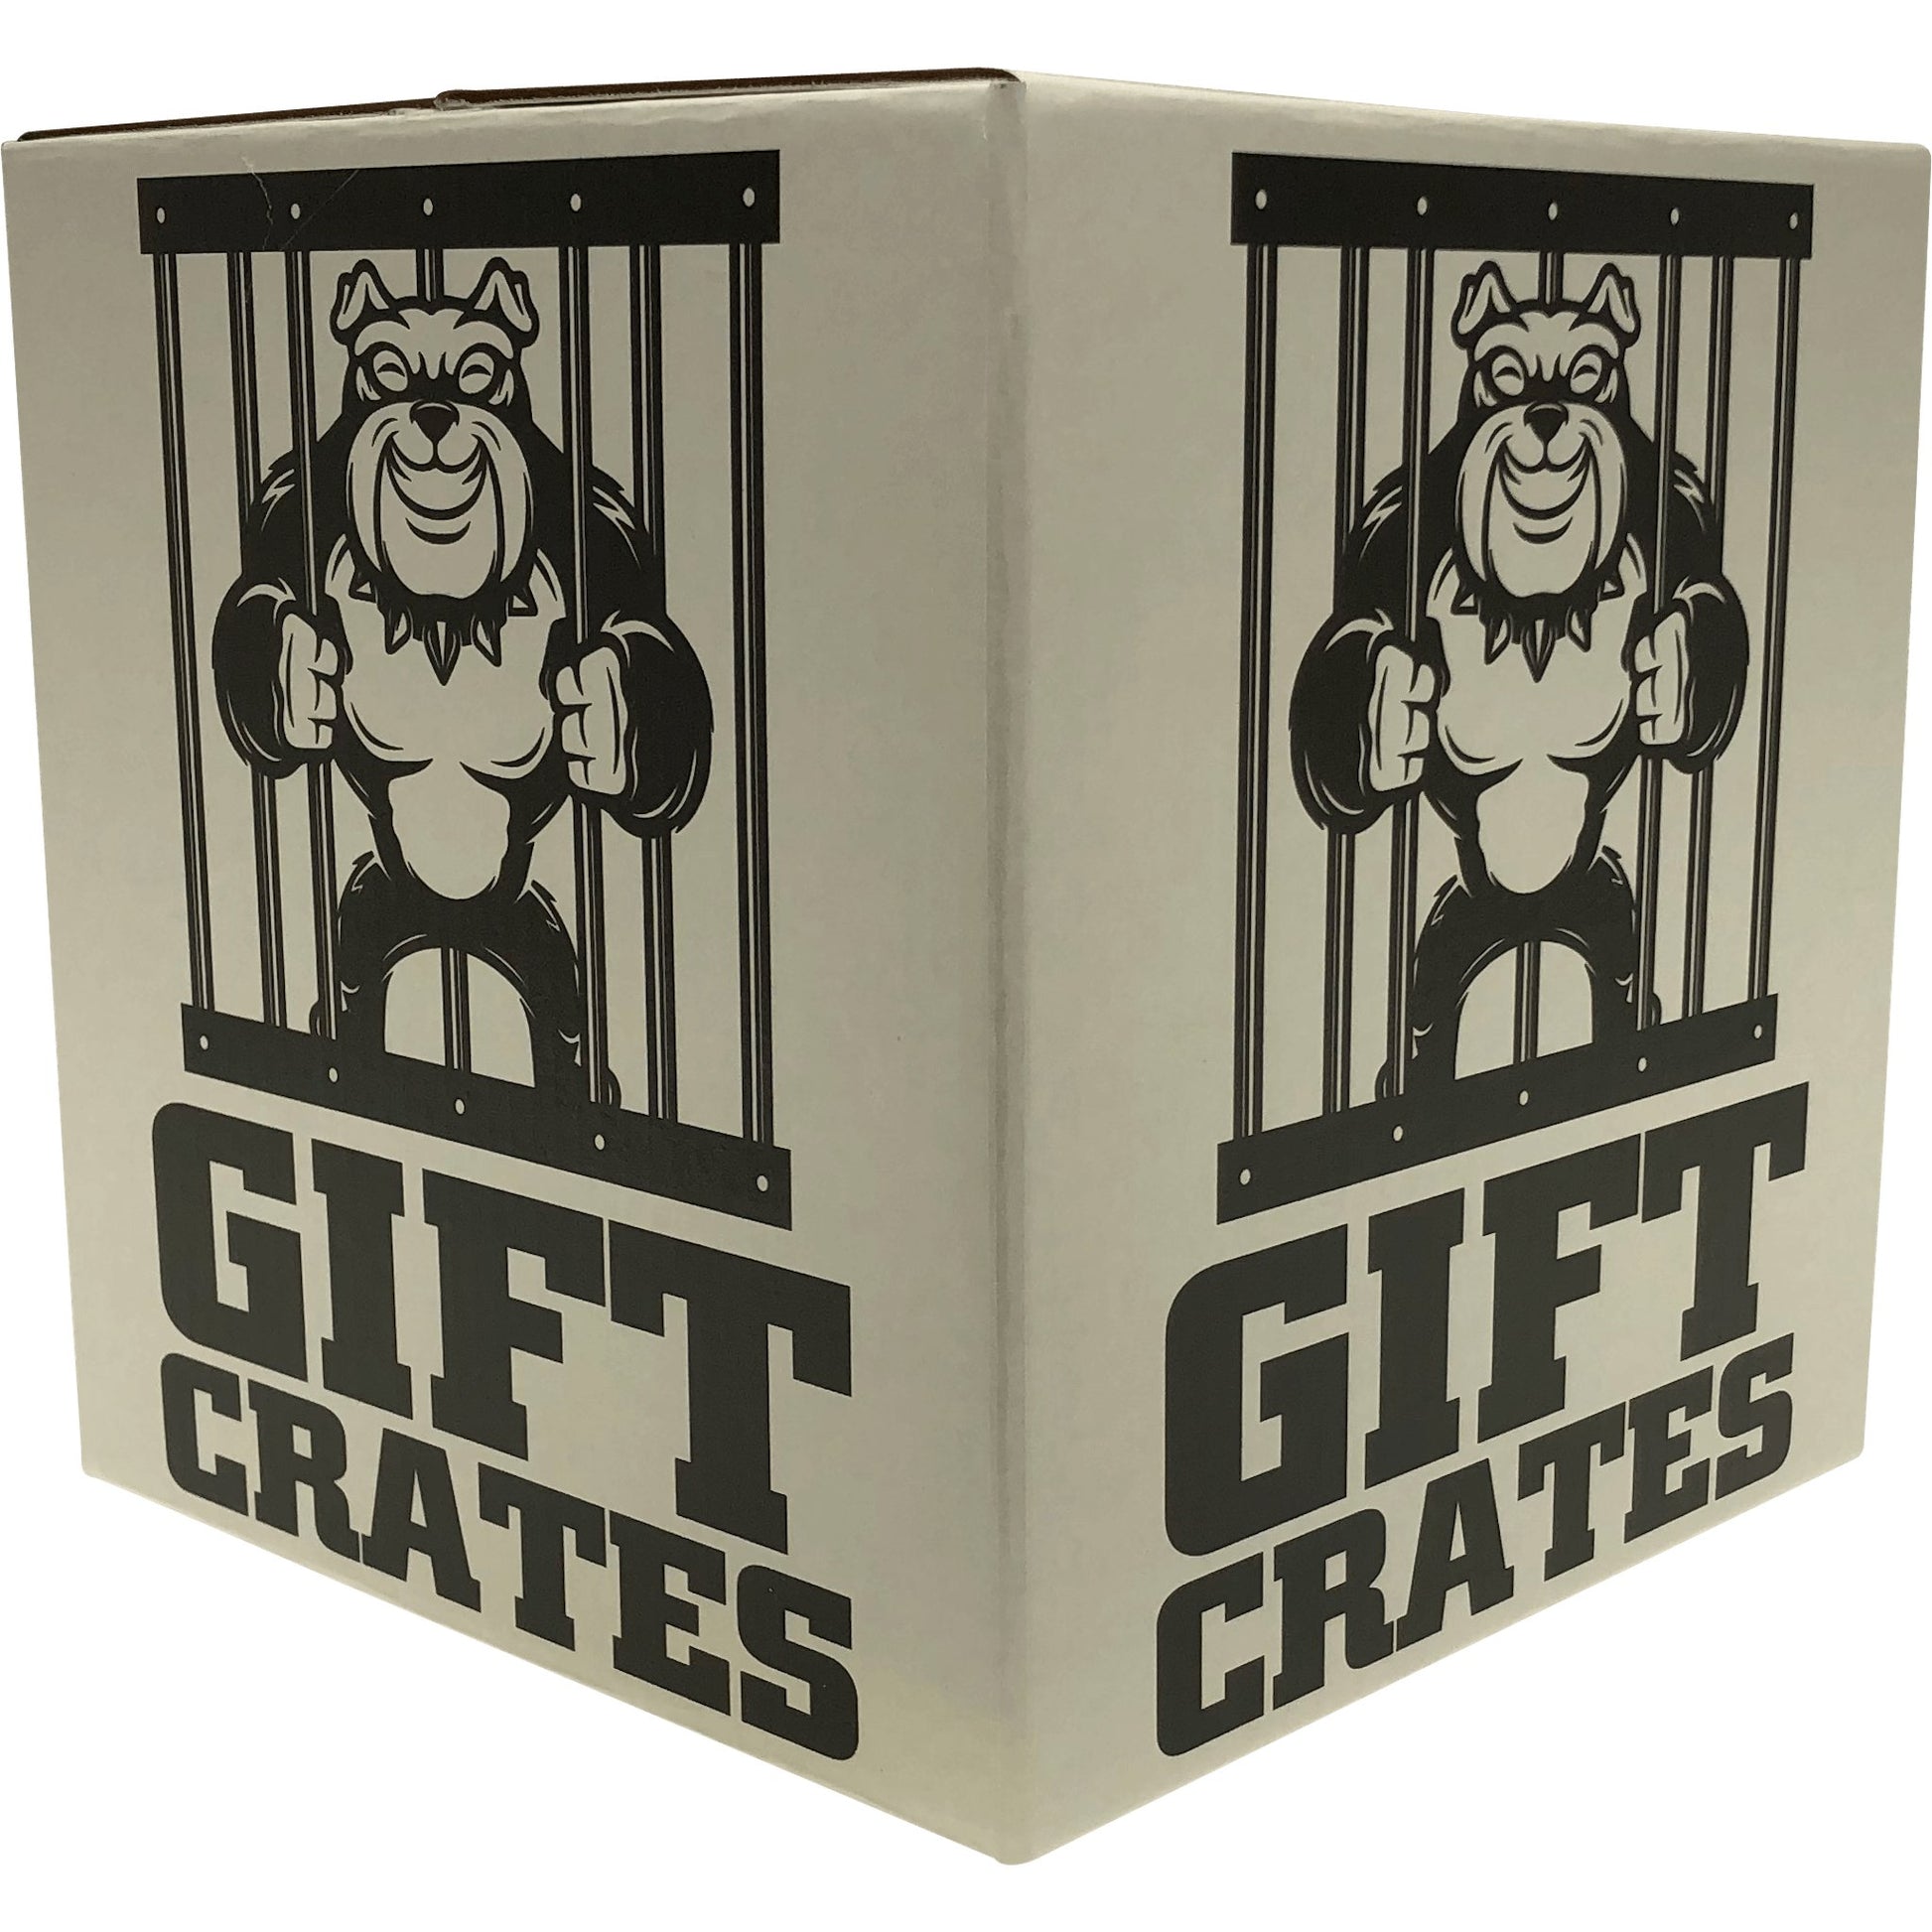 Bacon Crate - Gift Crates